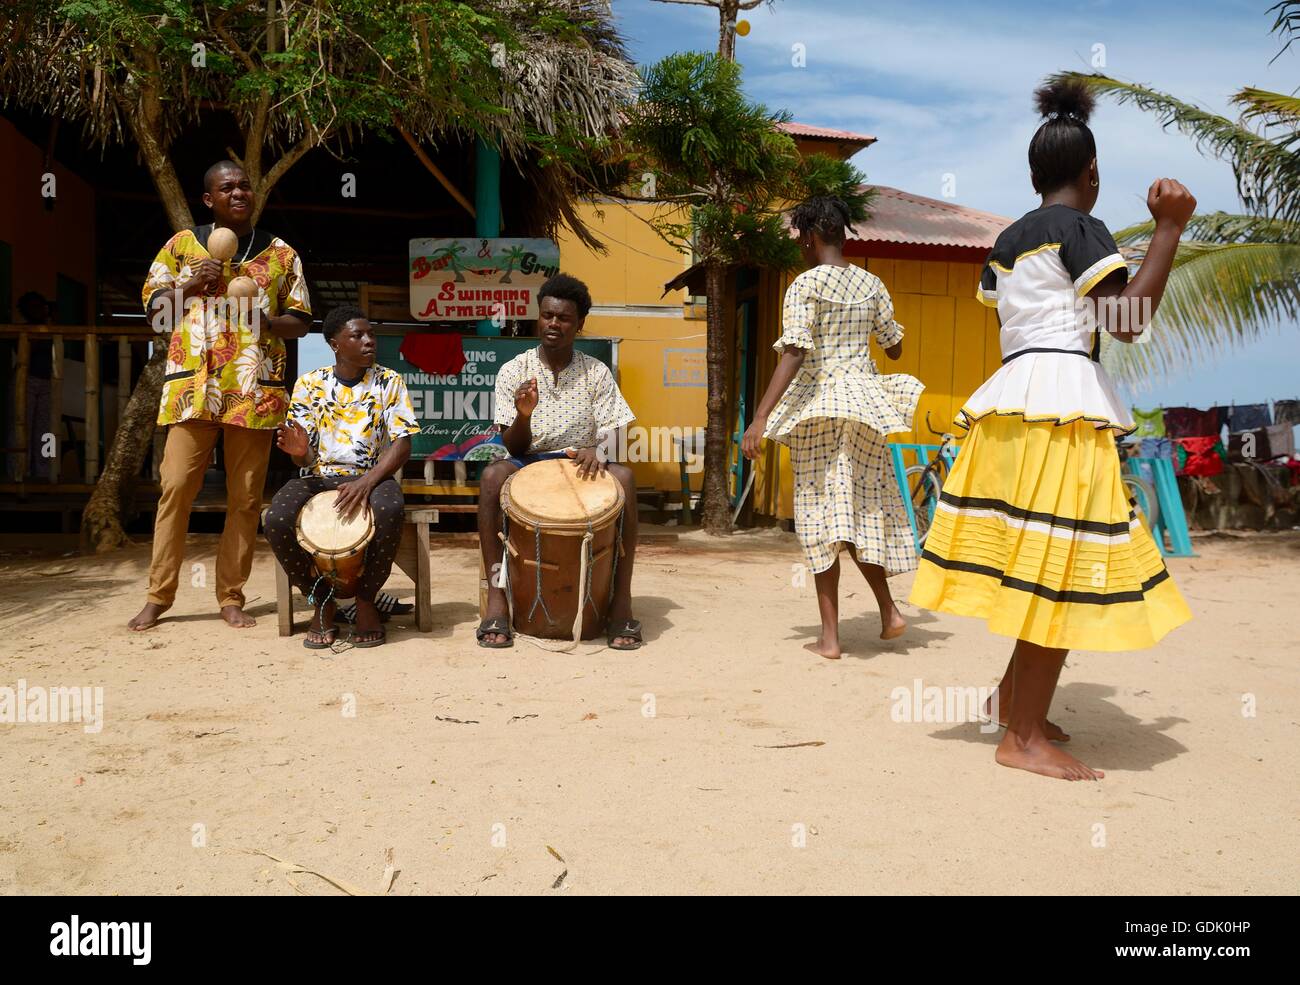 Hopkins Village, Belize - July 03, 2016: Garifuna troupe performs traditional songs with drumming and dancing in Hopkins Village Stock Photo